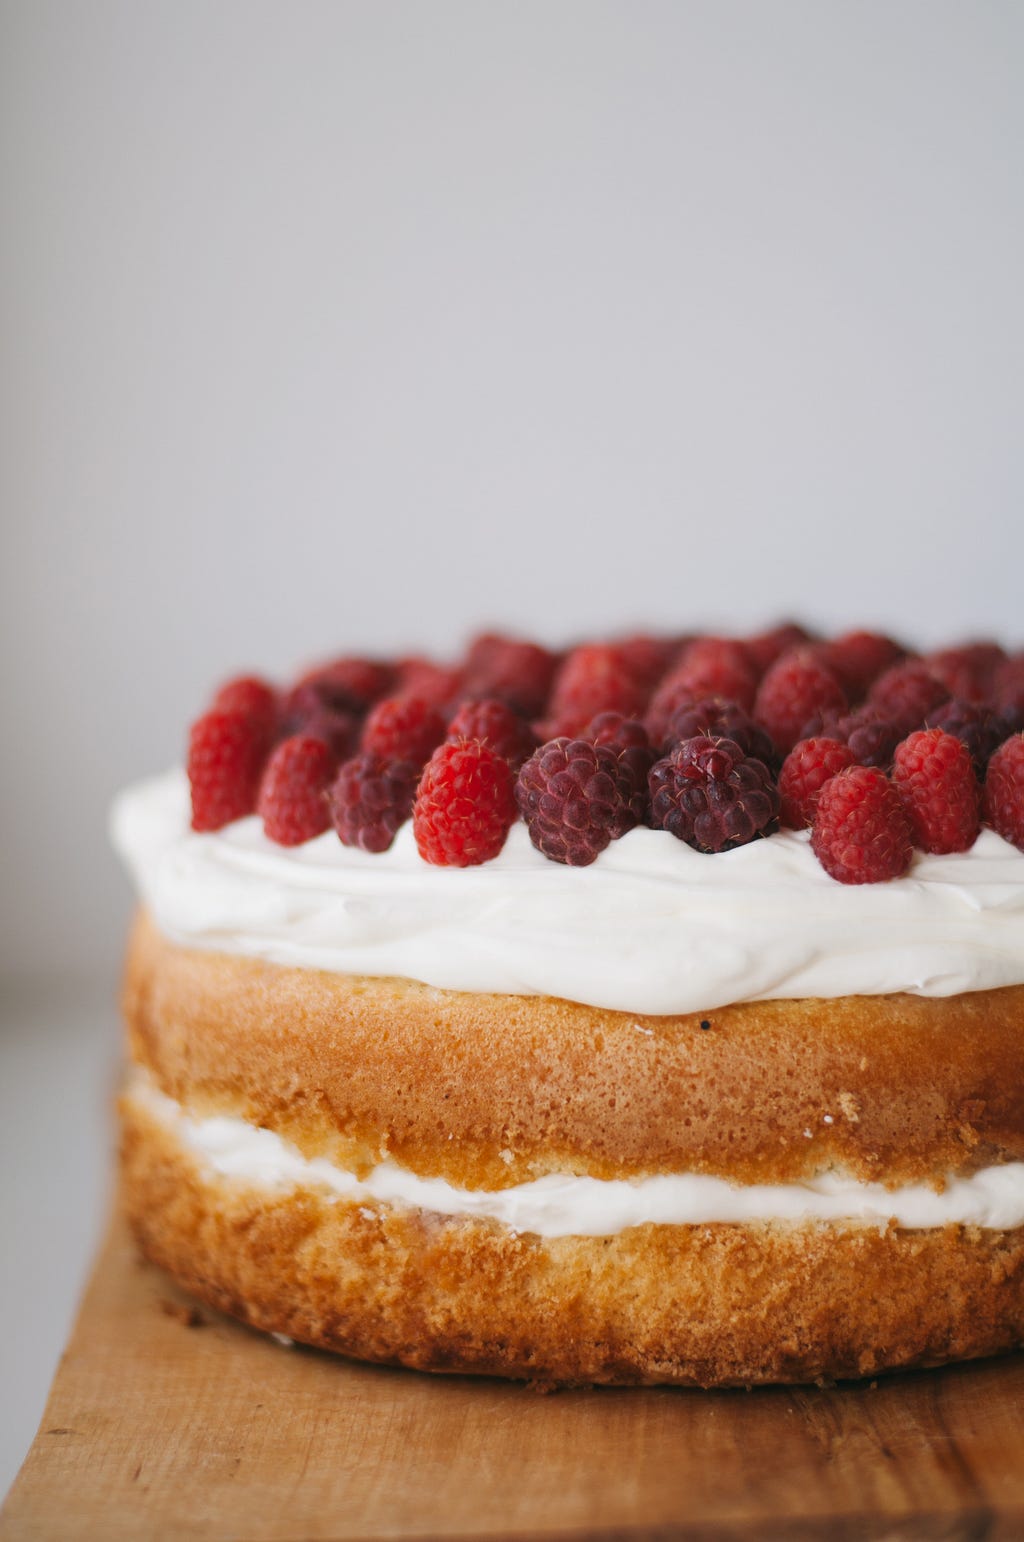 Layer cake with white icing and red raspberries on top. Grey background